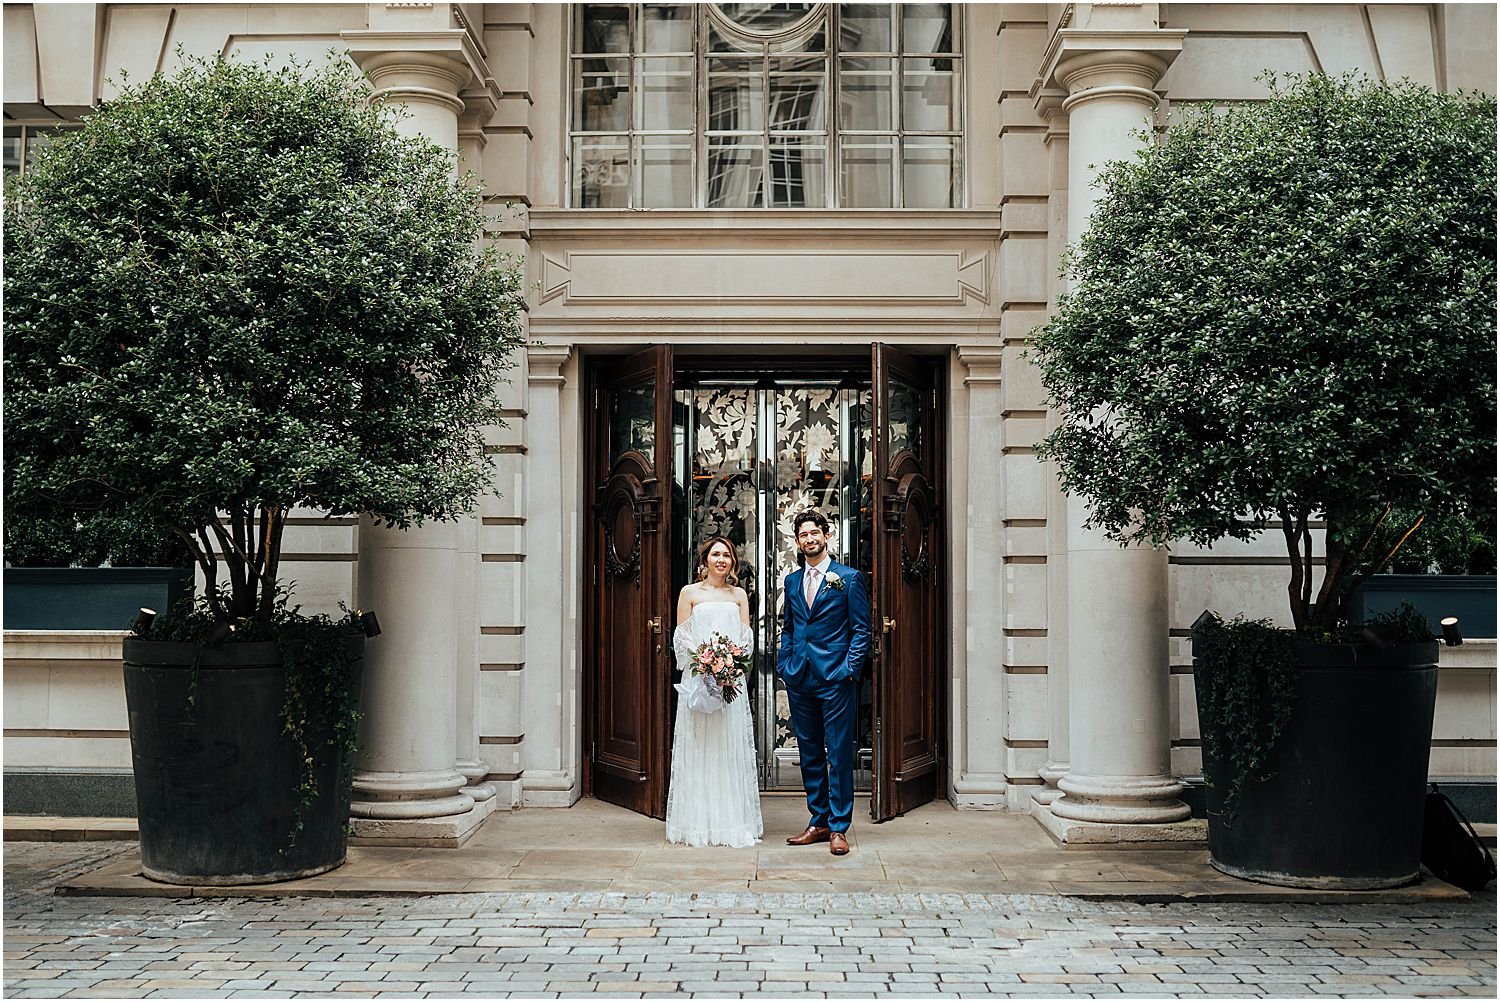 Wedding couple in courtyard at Rosewood Hotel